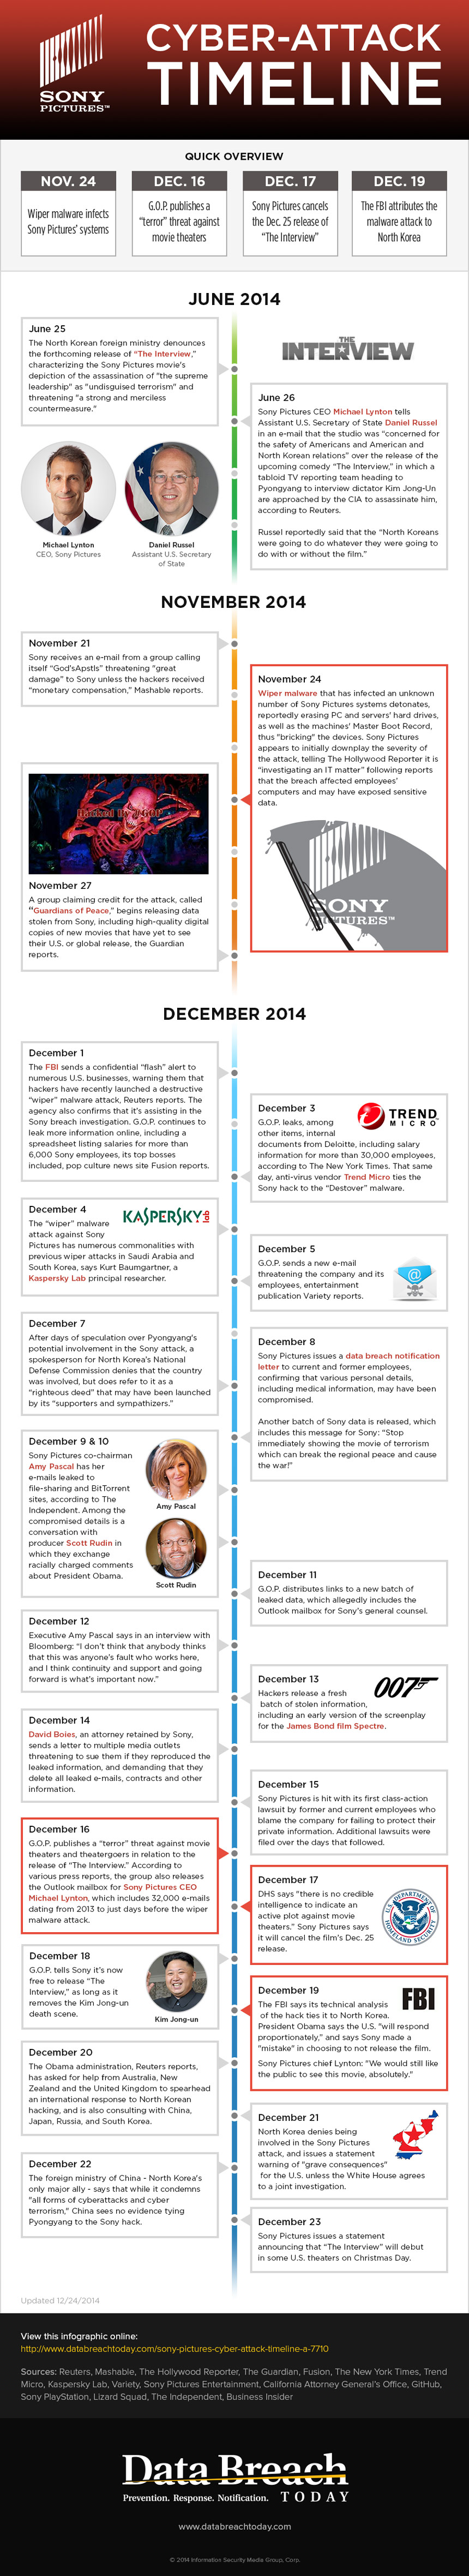 sony-pictures-cyber-attack-timeline-infographic-860